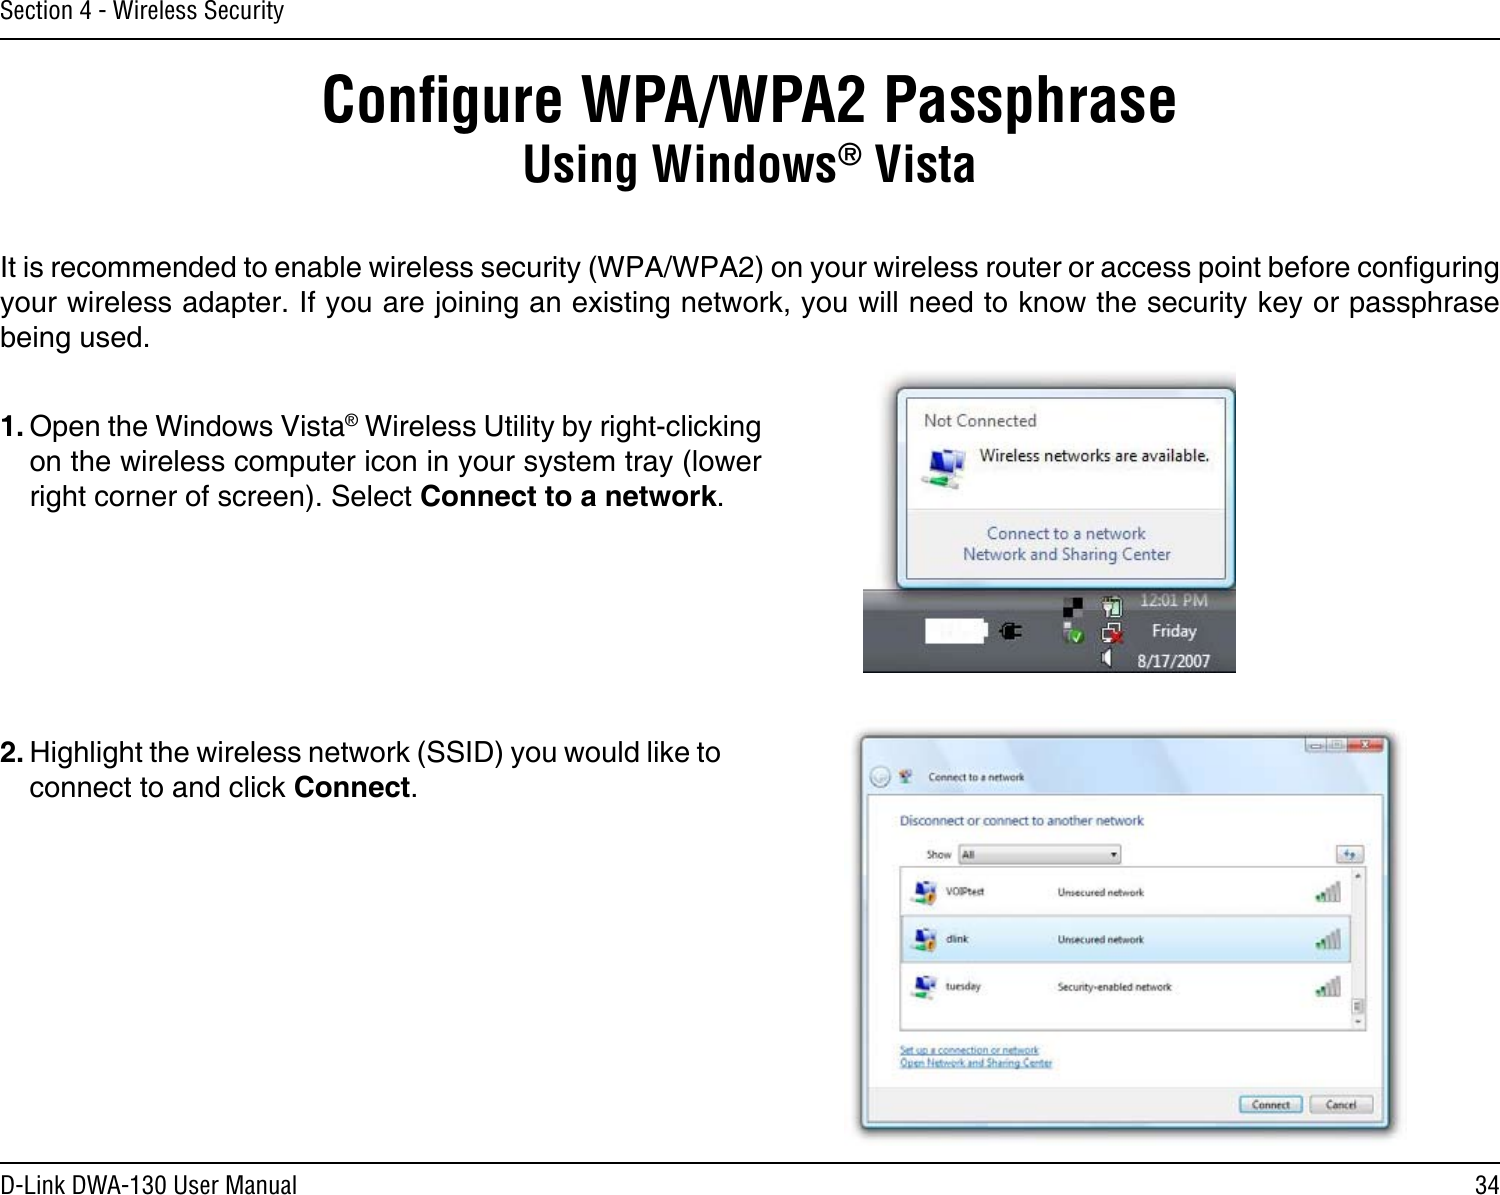 34D-Link DWA-130 User ManualSection 4 - Wireless SecurityConﬁgure WPA/WPA2 PassphraseUsing Windows® VistaIt is recommended to enable wireless security (WPA/WPA2) on your wireless router or access point before conguring your wireless adapter. If you are joining an existing network, you will need to know the security key or passphrase being used.2. Highlight the wireless network (SSID) you would like to connect to and click Connect.1. Open the Windows Vista® Wireless Utility by right-clicking on the wireless computer icon in your system tray (lower right corner of screen). Select Connect to a network. 